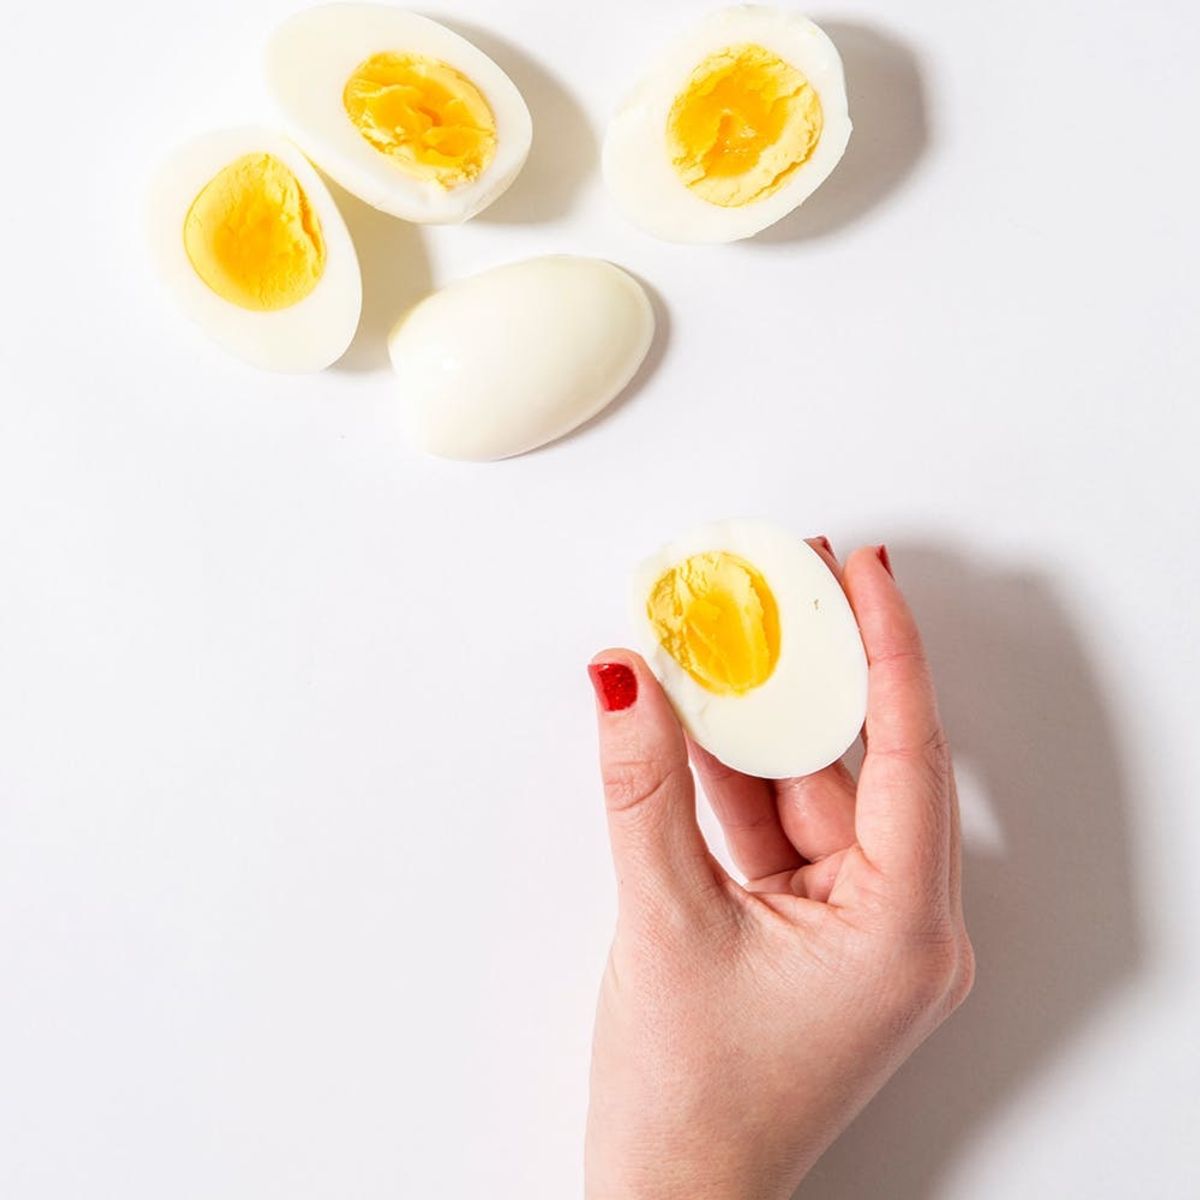 Proof That the Instant Pot Makes the Best Hard-Boiled Eggs